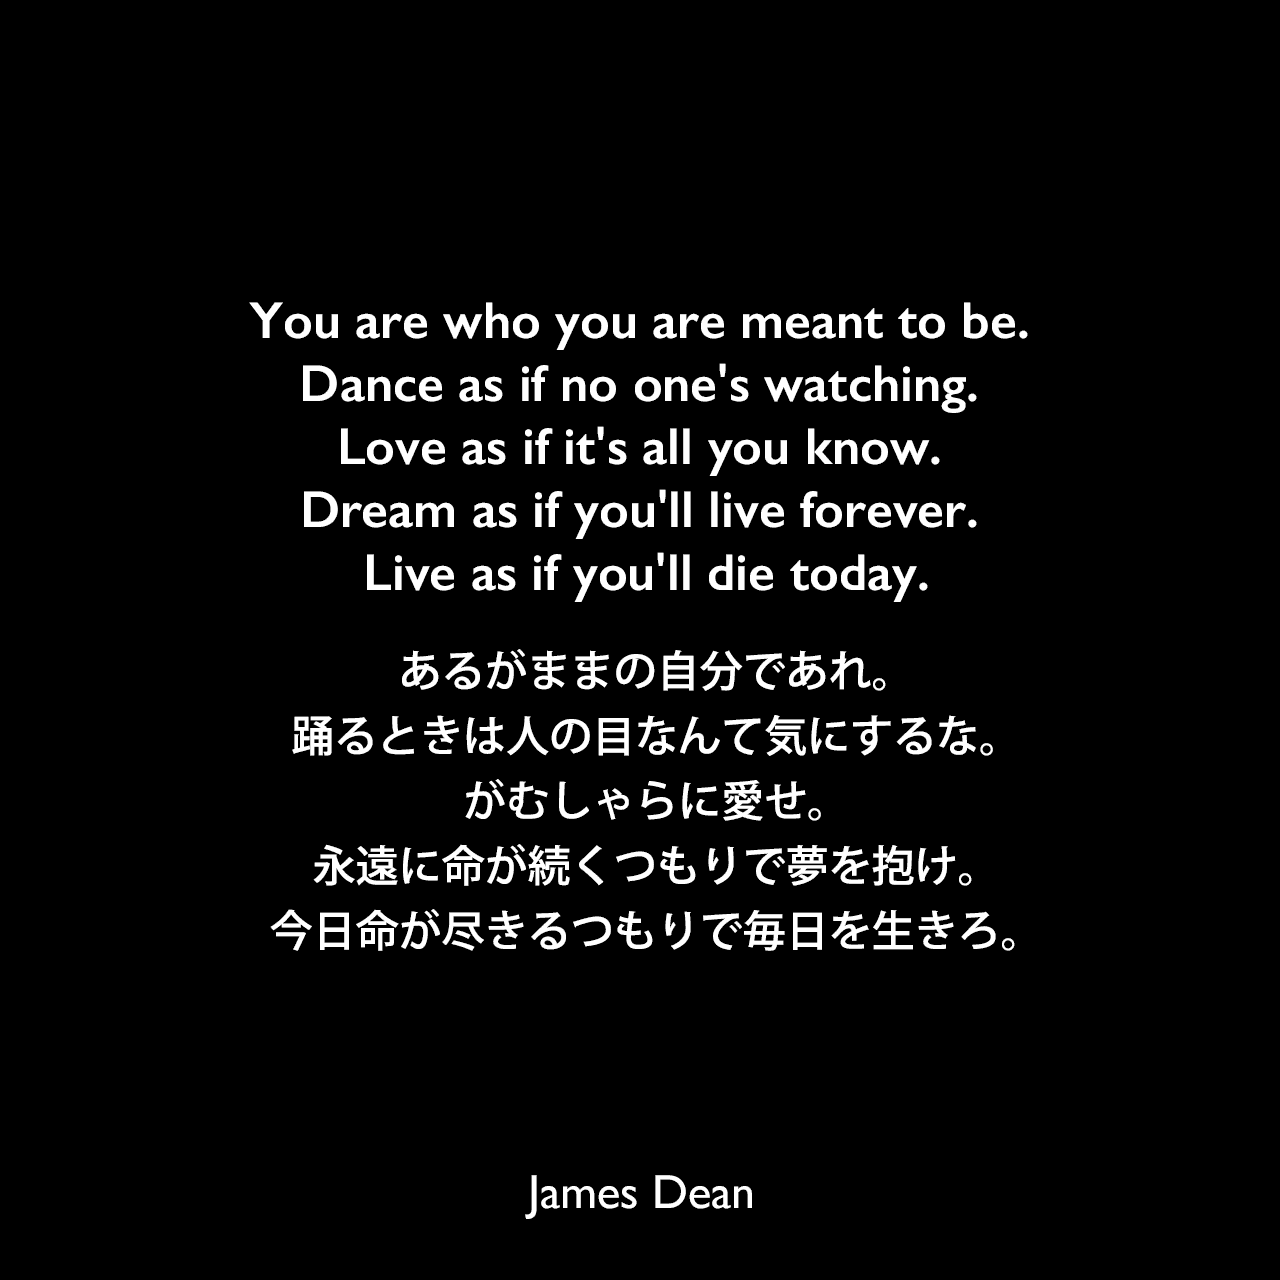 You are who you are meant to be. Dance as if no one's watching. Love as if it's all you know. Dream as if you'll live forever. Live as if you'll die today.あるがままの自分であれ。踊るときは人の目なんて気にするな。がむしゃらに愛せ。永遠に命が続くつもりで夢を抱け。今日命が尽きるつもりで毎日を生きろ。James Dean